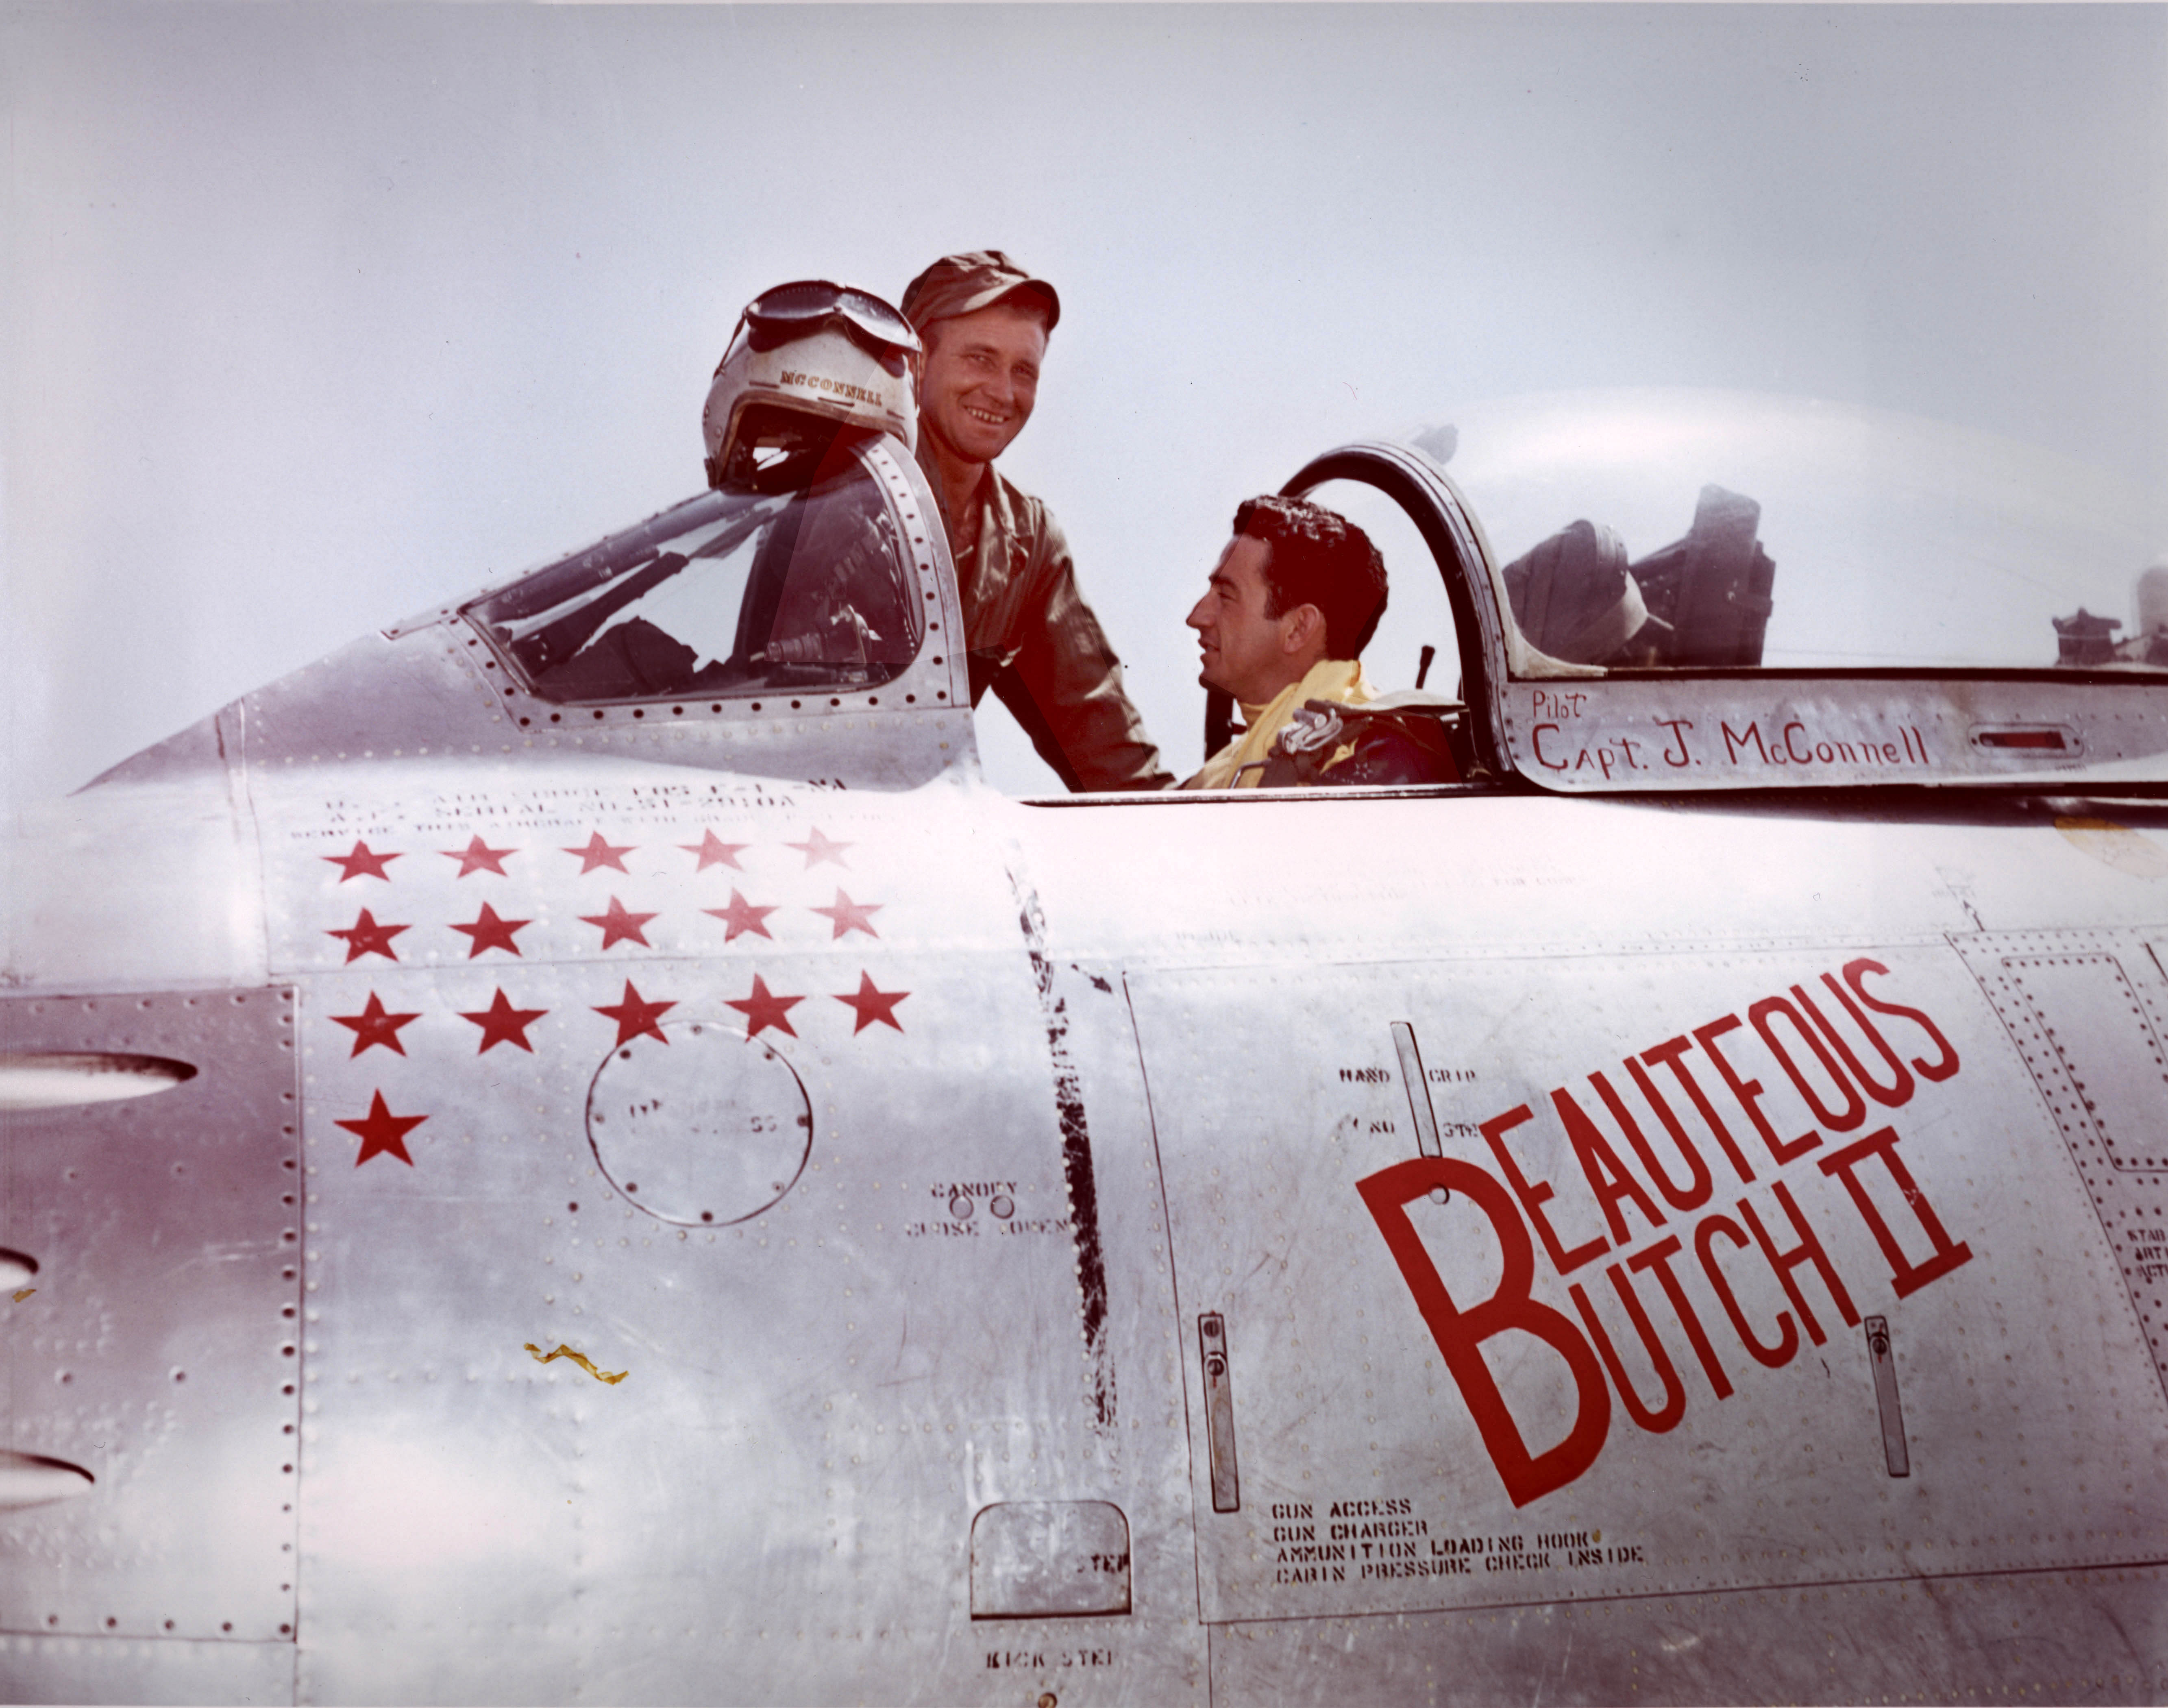 Captain McConnell in teh cockpit of Beauteous Butch II after his final combat mission, 18 May 1953. The airplane is McConnell's third Sabre, F-86F-1-NA 51-2910. (U.S. Air Force)